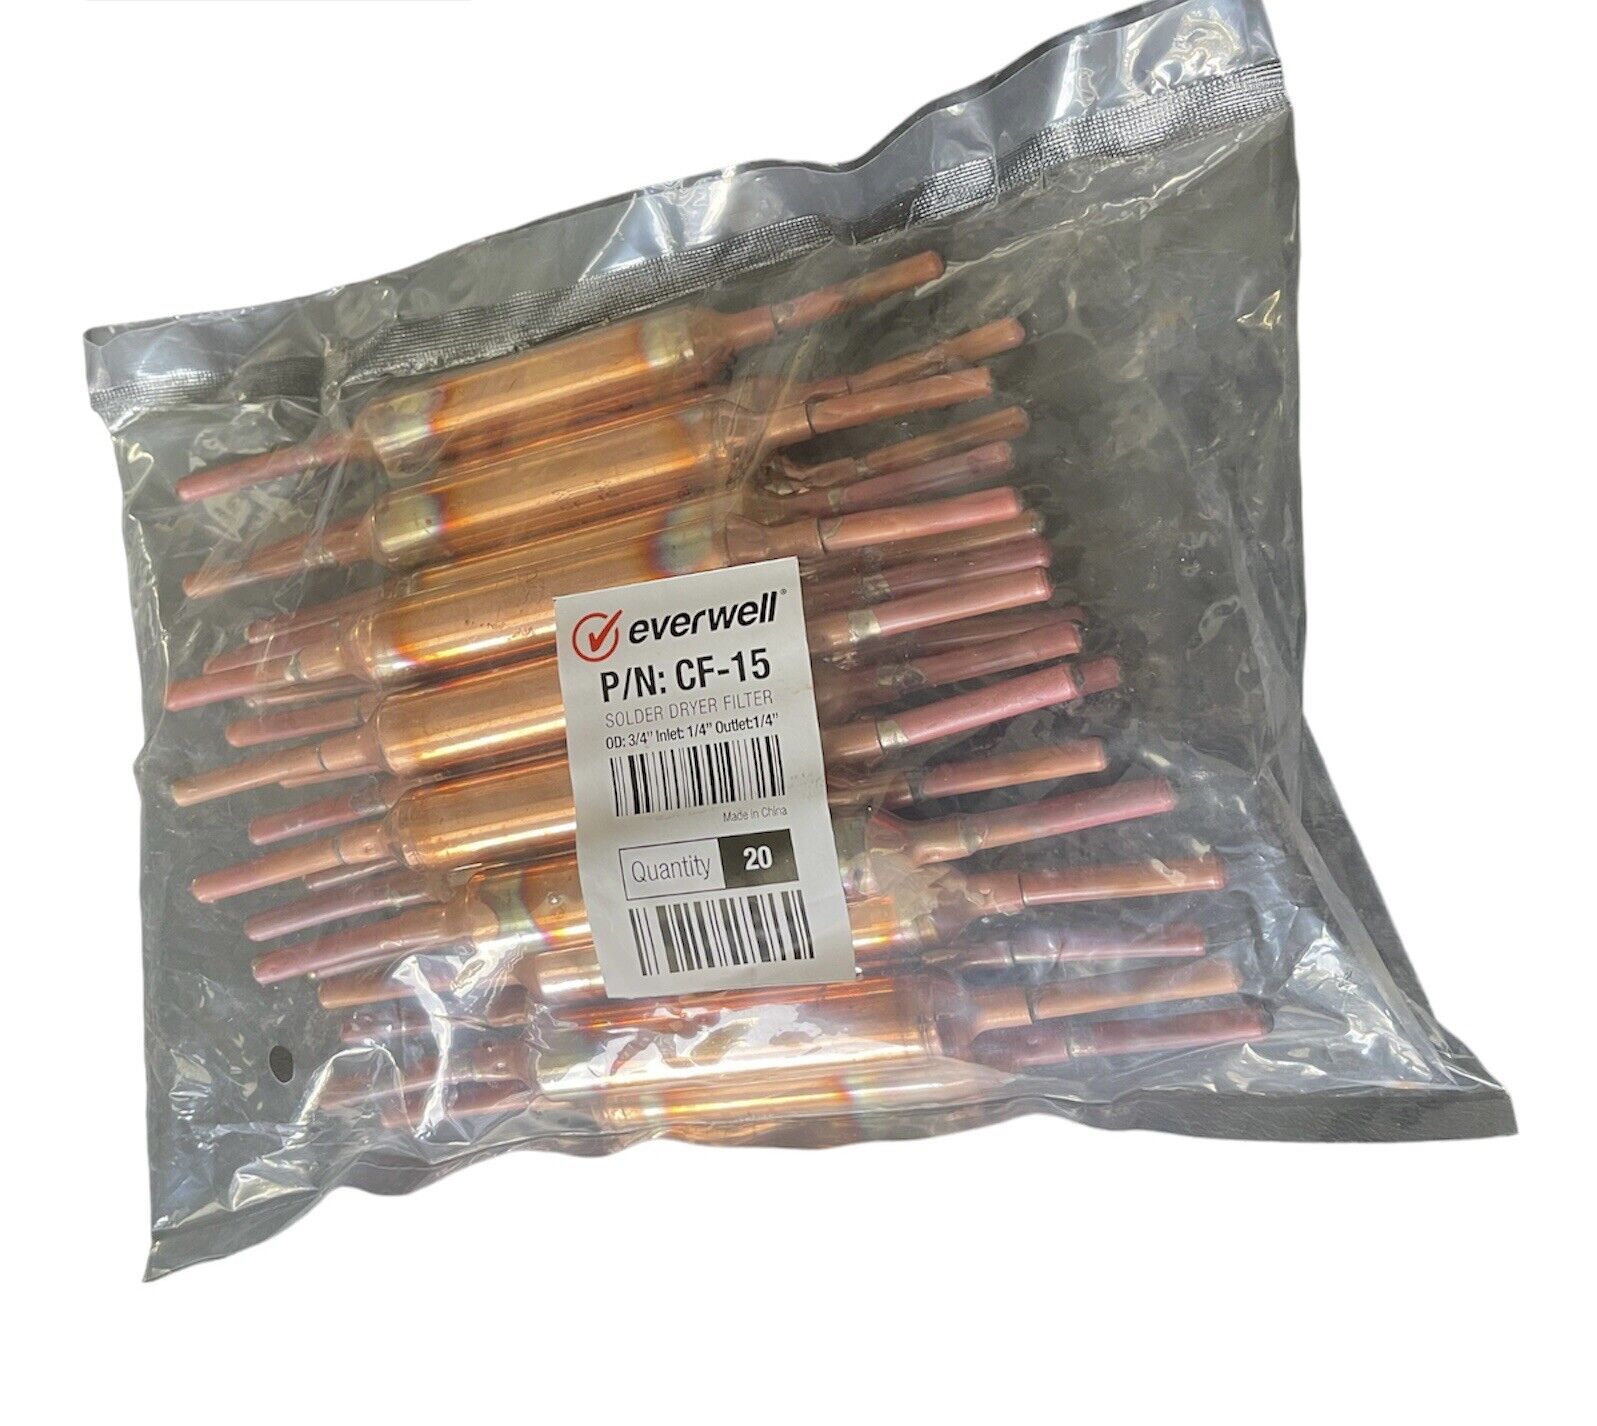 Copper Solder Filter Drier 15 grams w/Silica for AC & Refrigeration Linean 20pcs